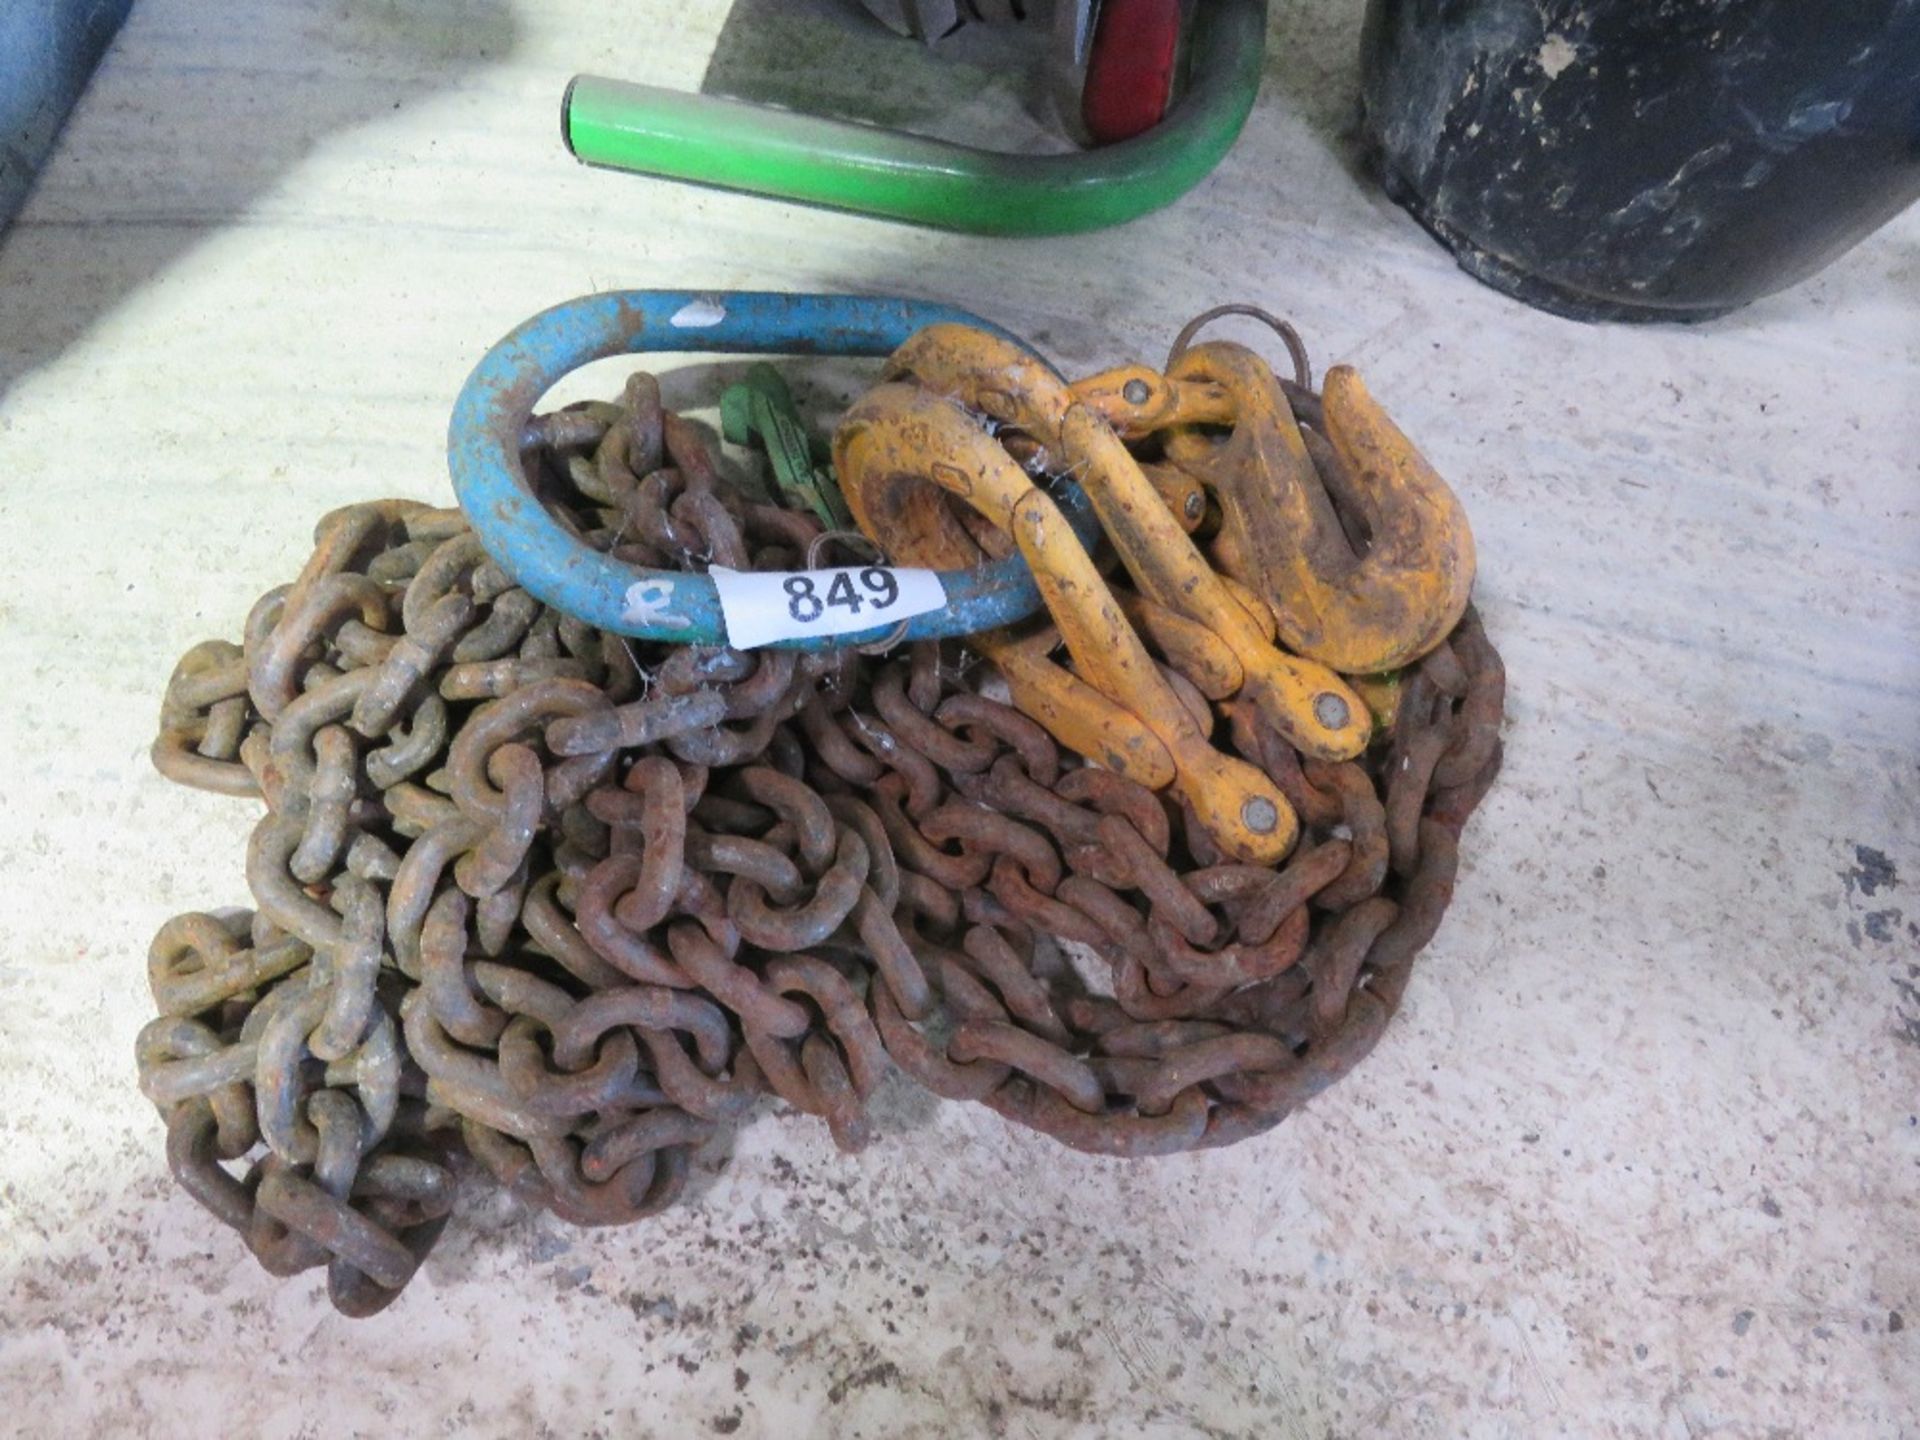 SET OF 2 LEGGED LIFING CHAINS WITH SHORTENERS, 8FT LENGTH APPROX.